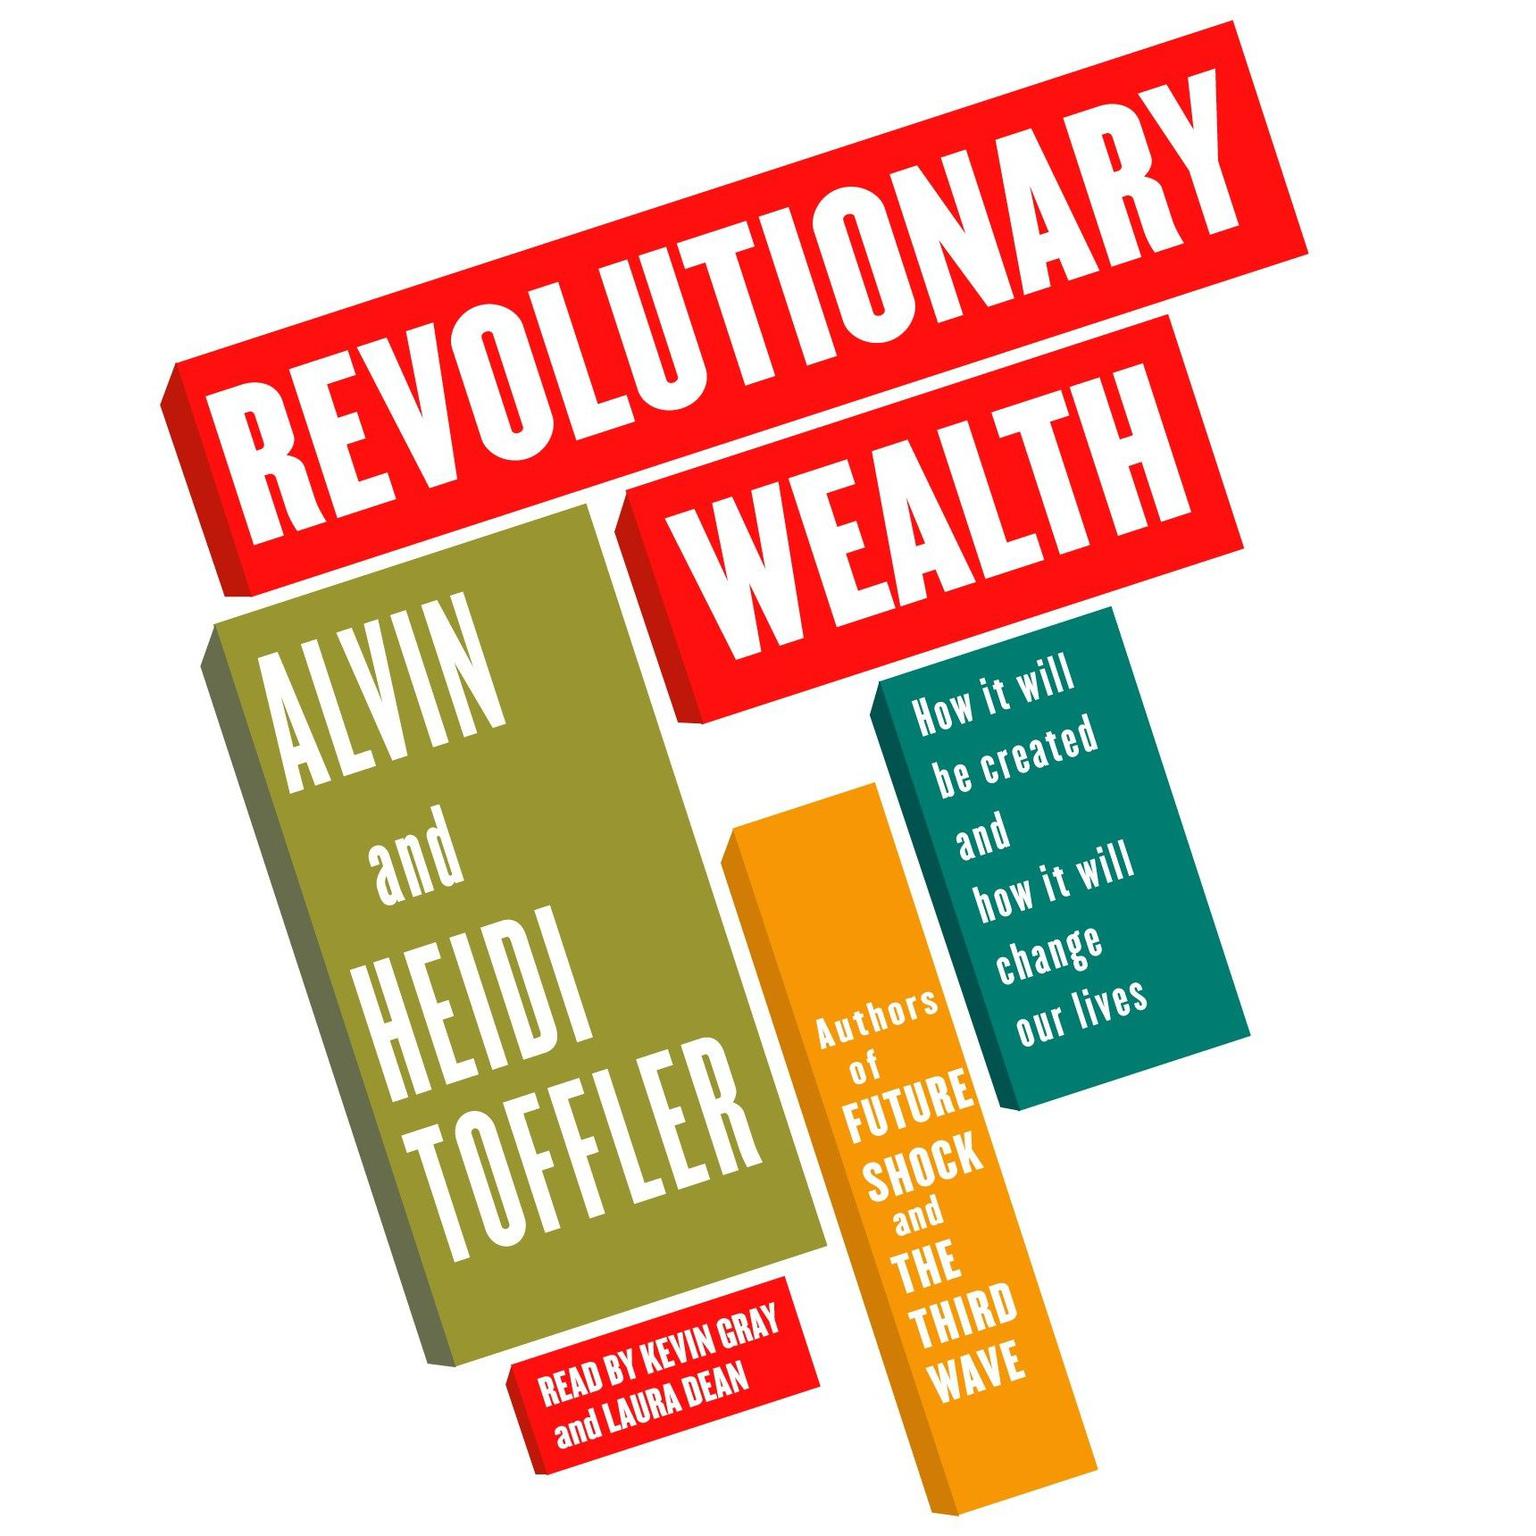 Revolutionary Wealth (Abridged): How it will be created and how it will change our lives Audiobook, by Alvin Toffler